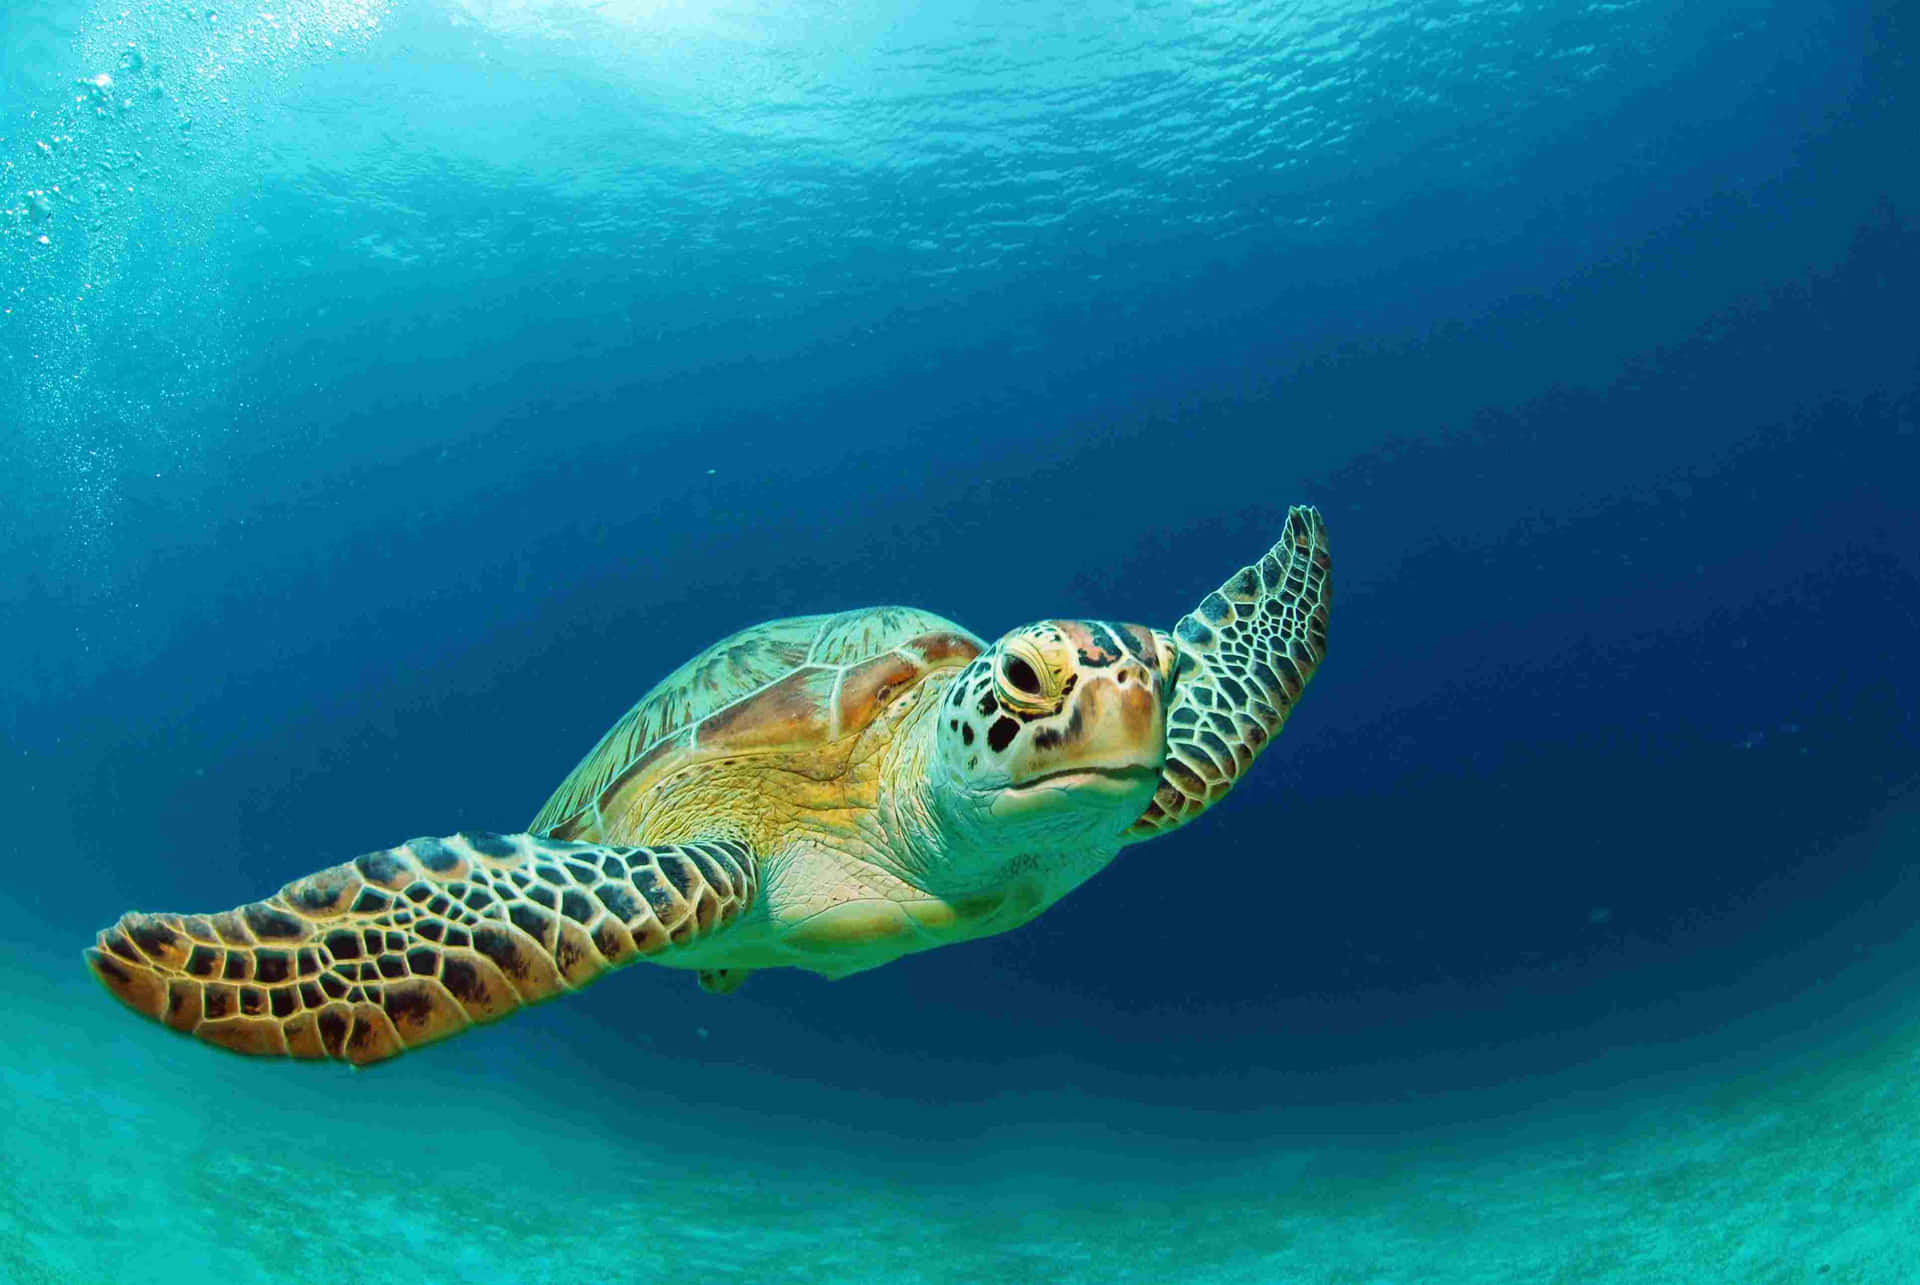 A peaceful sea turtle swimming in the ocean